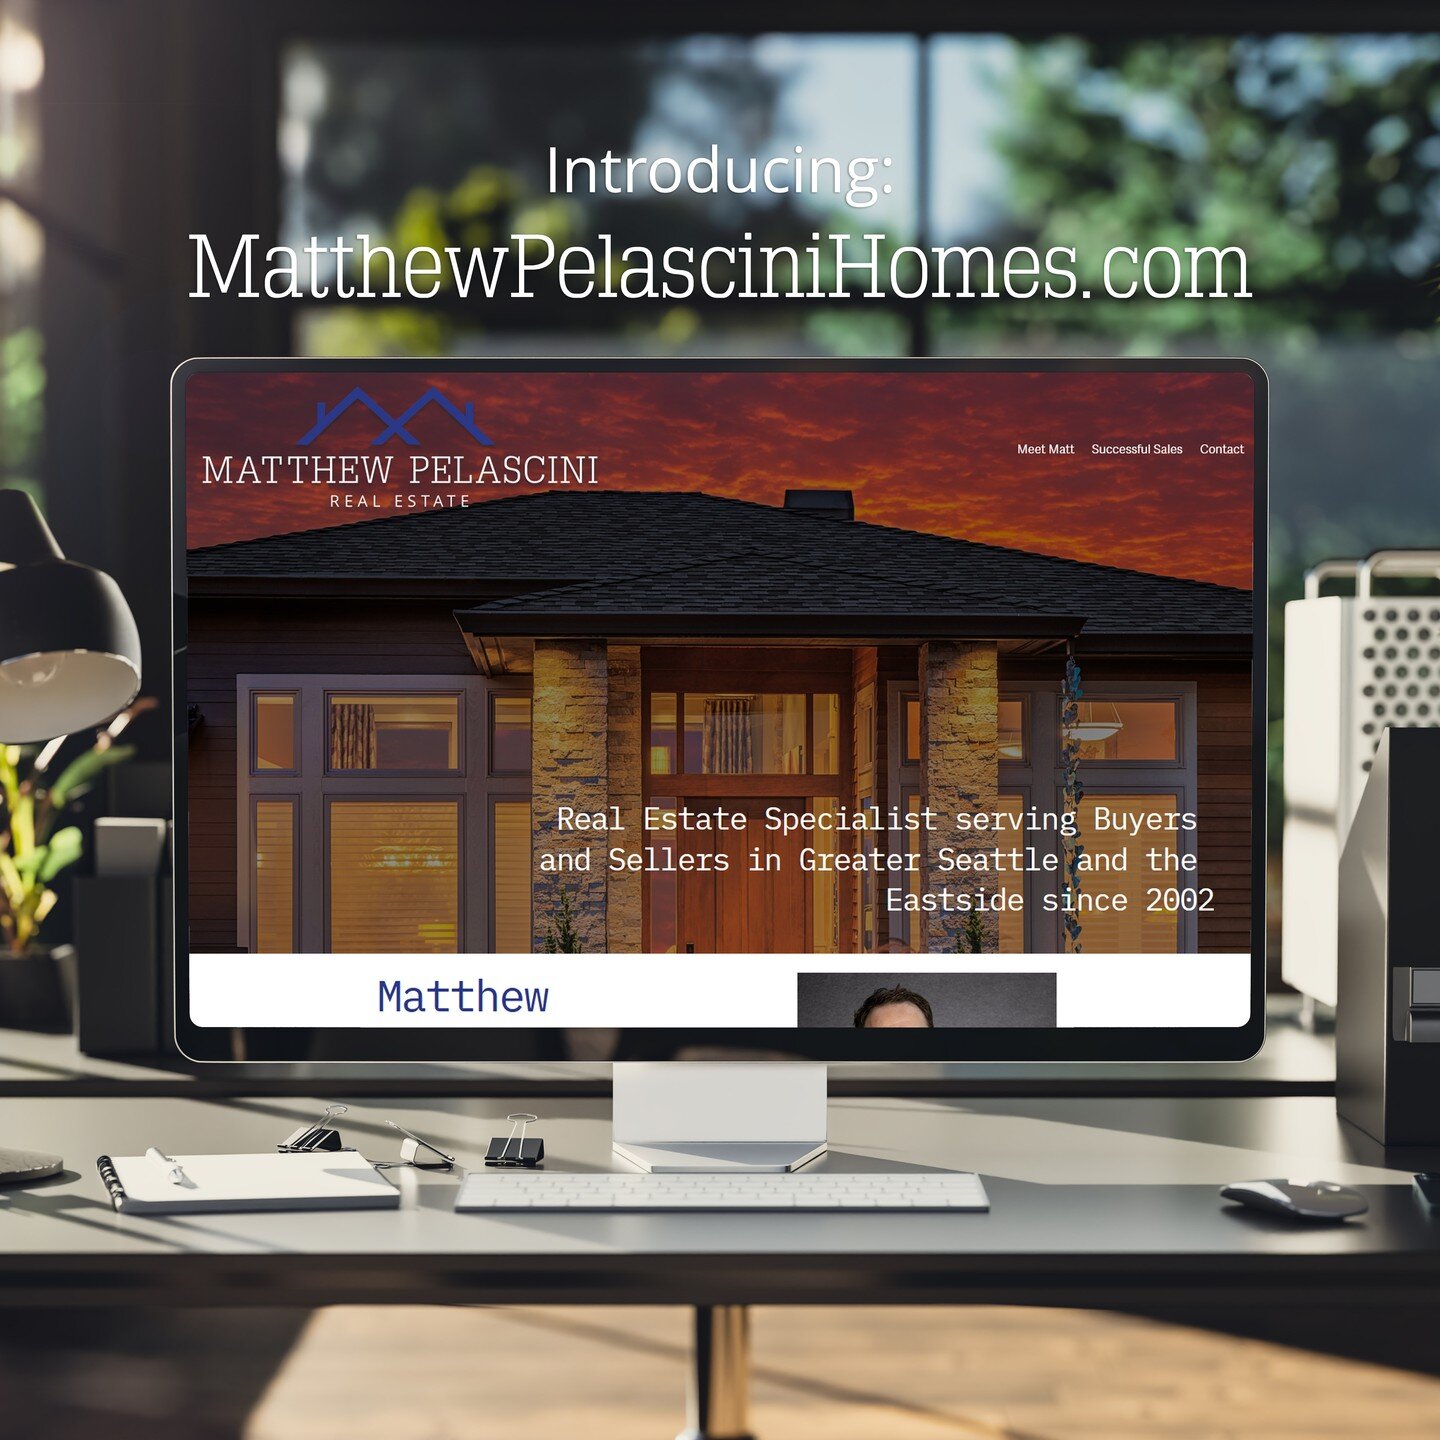 I am so pleased to present the website for Matthew Pelascini Homes! This was such a fun project - go check it out: https://www.matthewpelascinihomes.com/

#designingforrealestate #esperluettecreative #website #designer